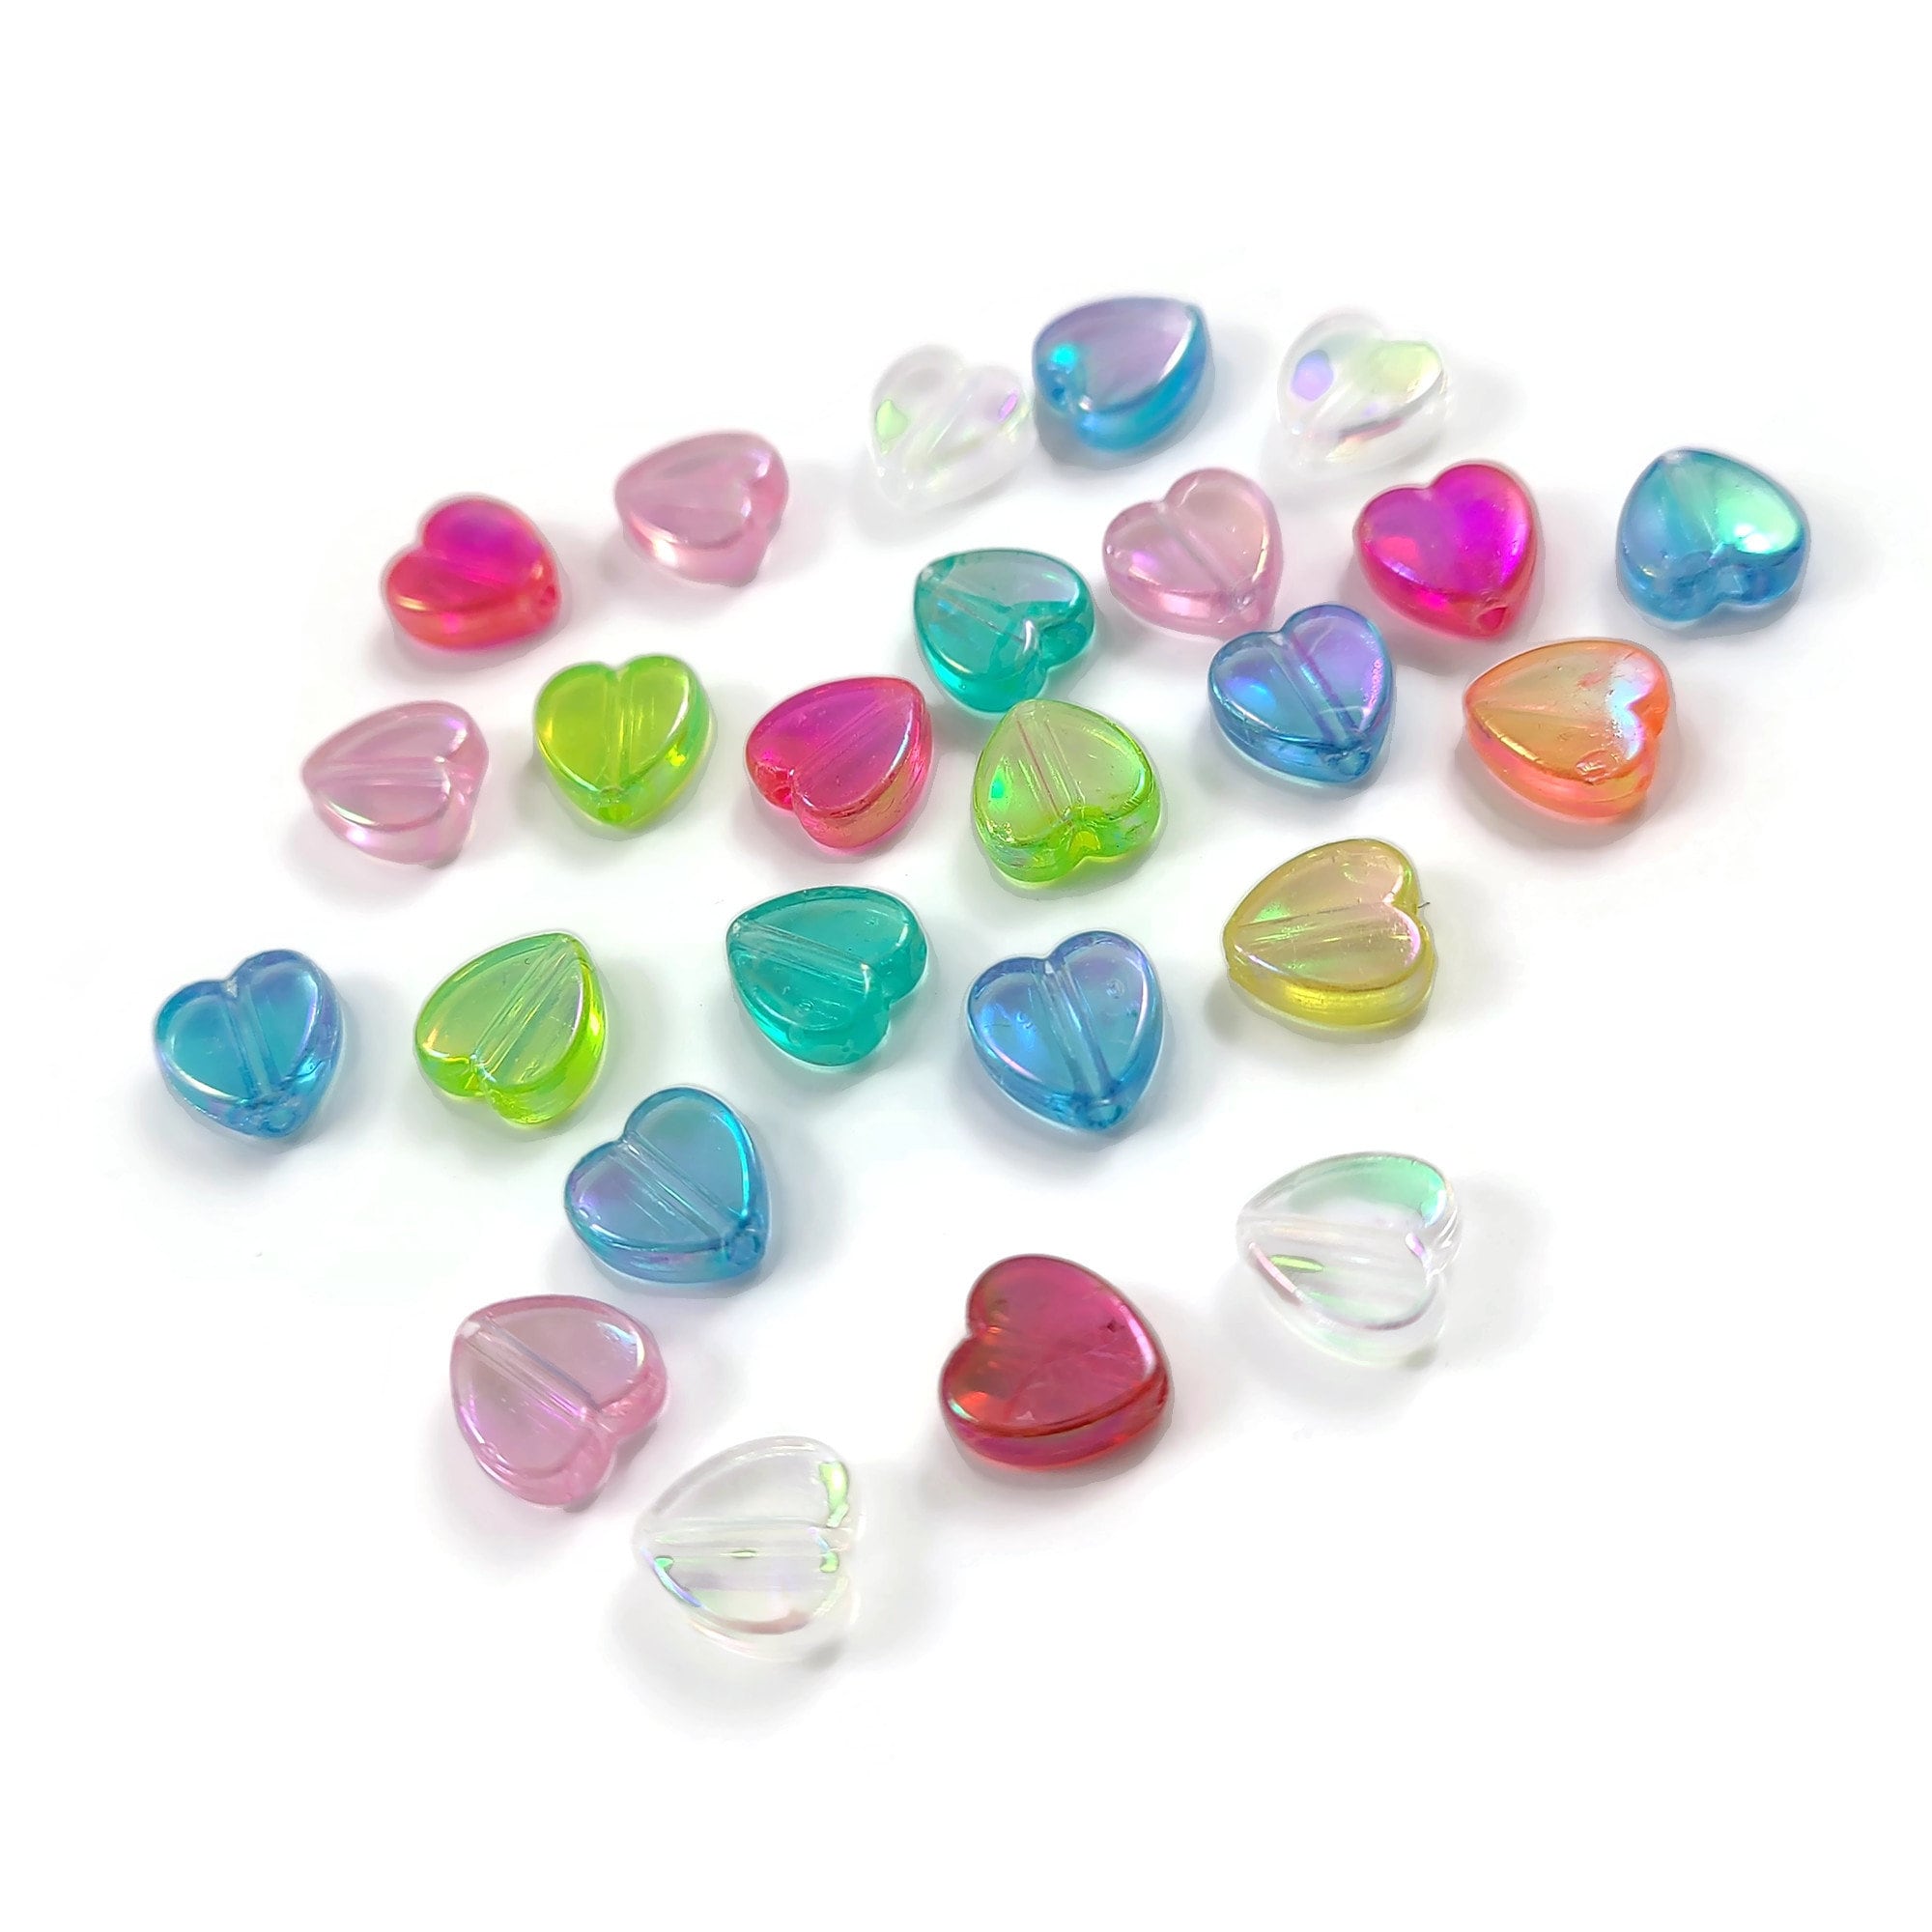 25 mixed transparent pearly heart beads, Assorted 8mm acrylic beads for jewelry making